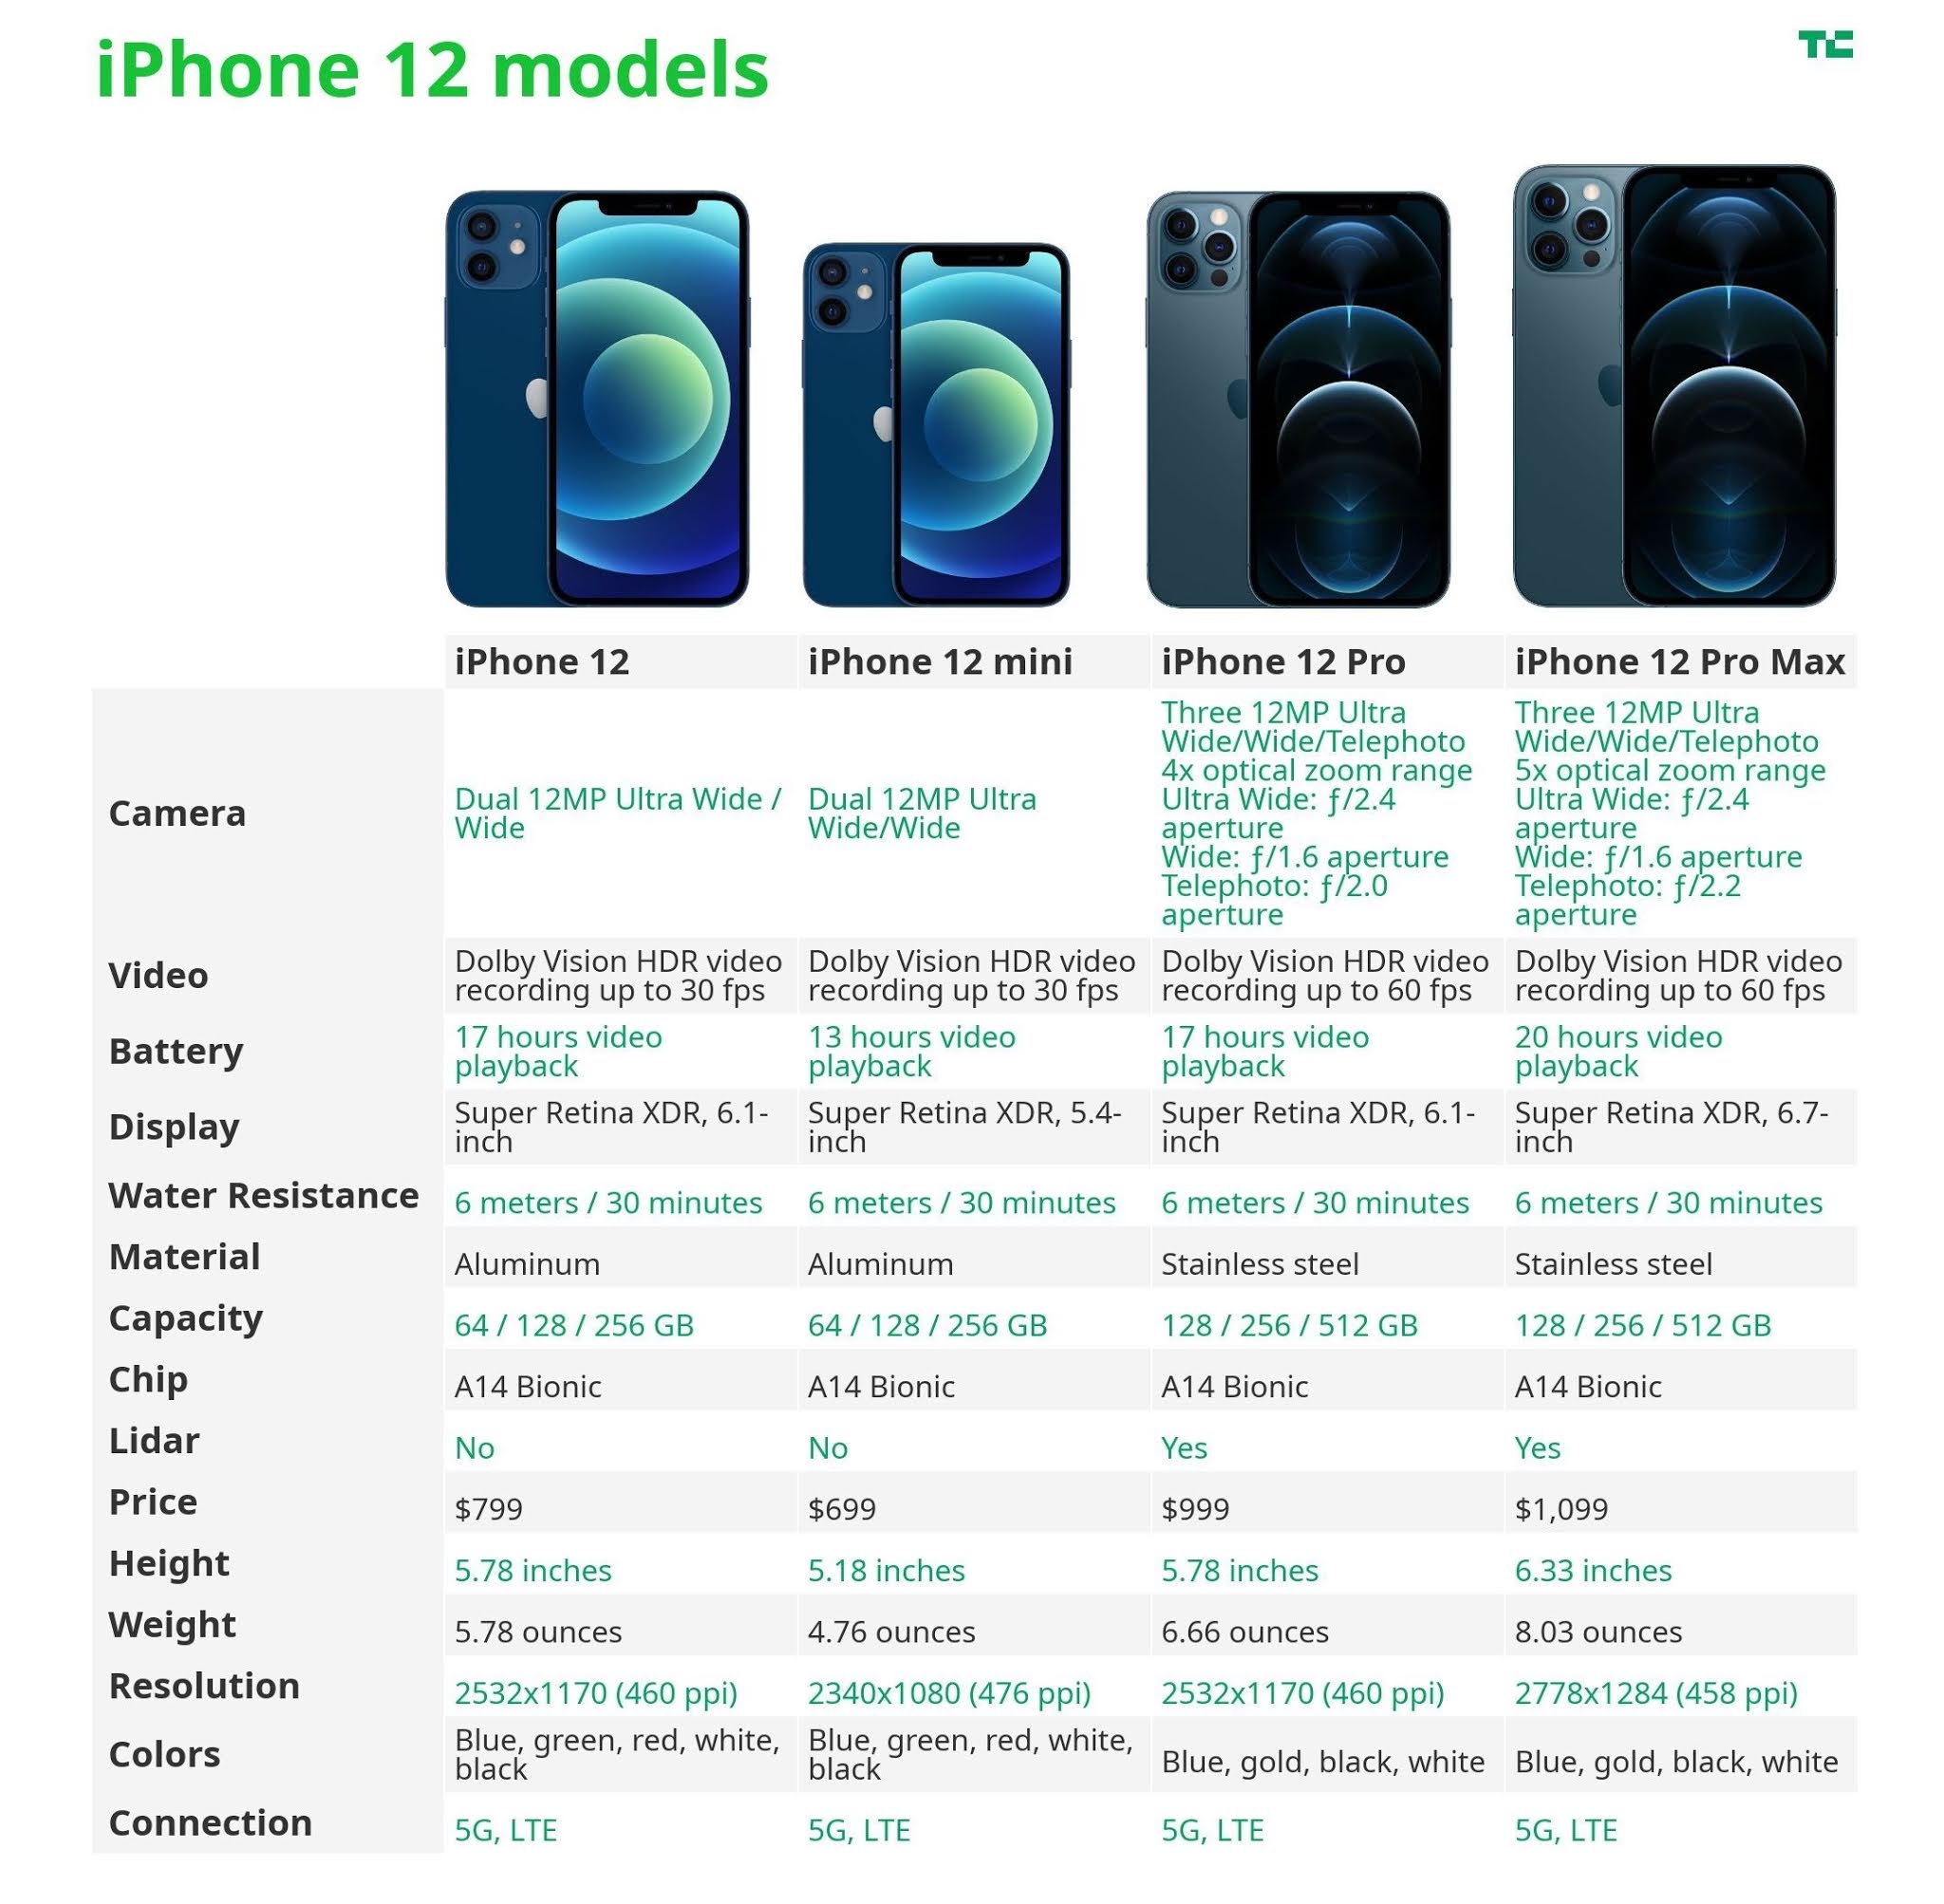 iPhone 12 Cheat Sheet: Pricing, Features & More for All 4 Models